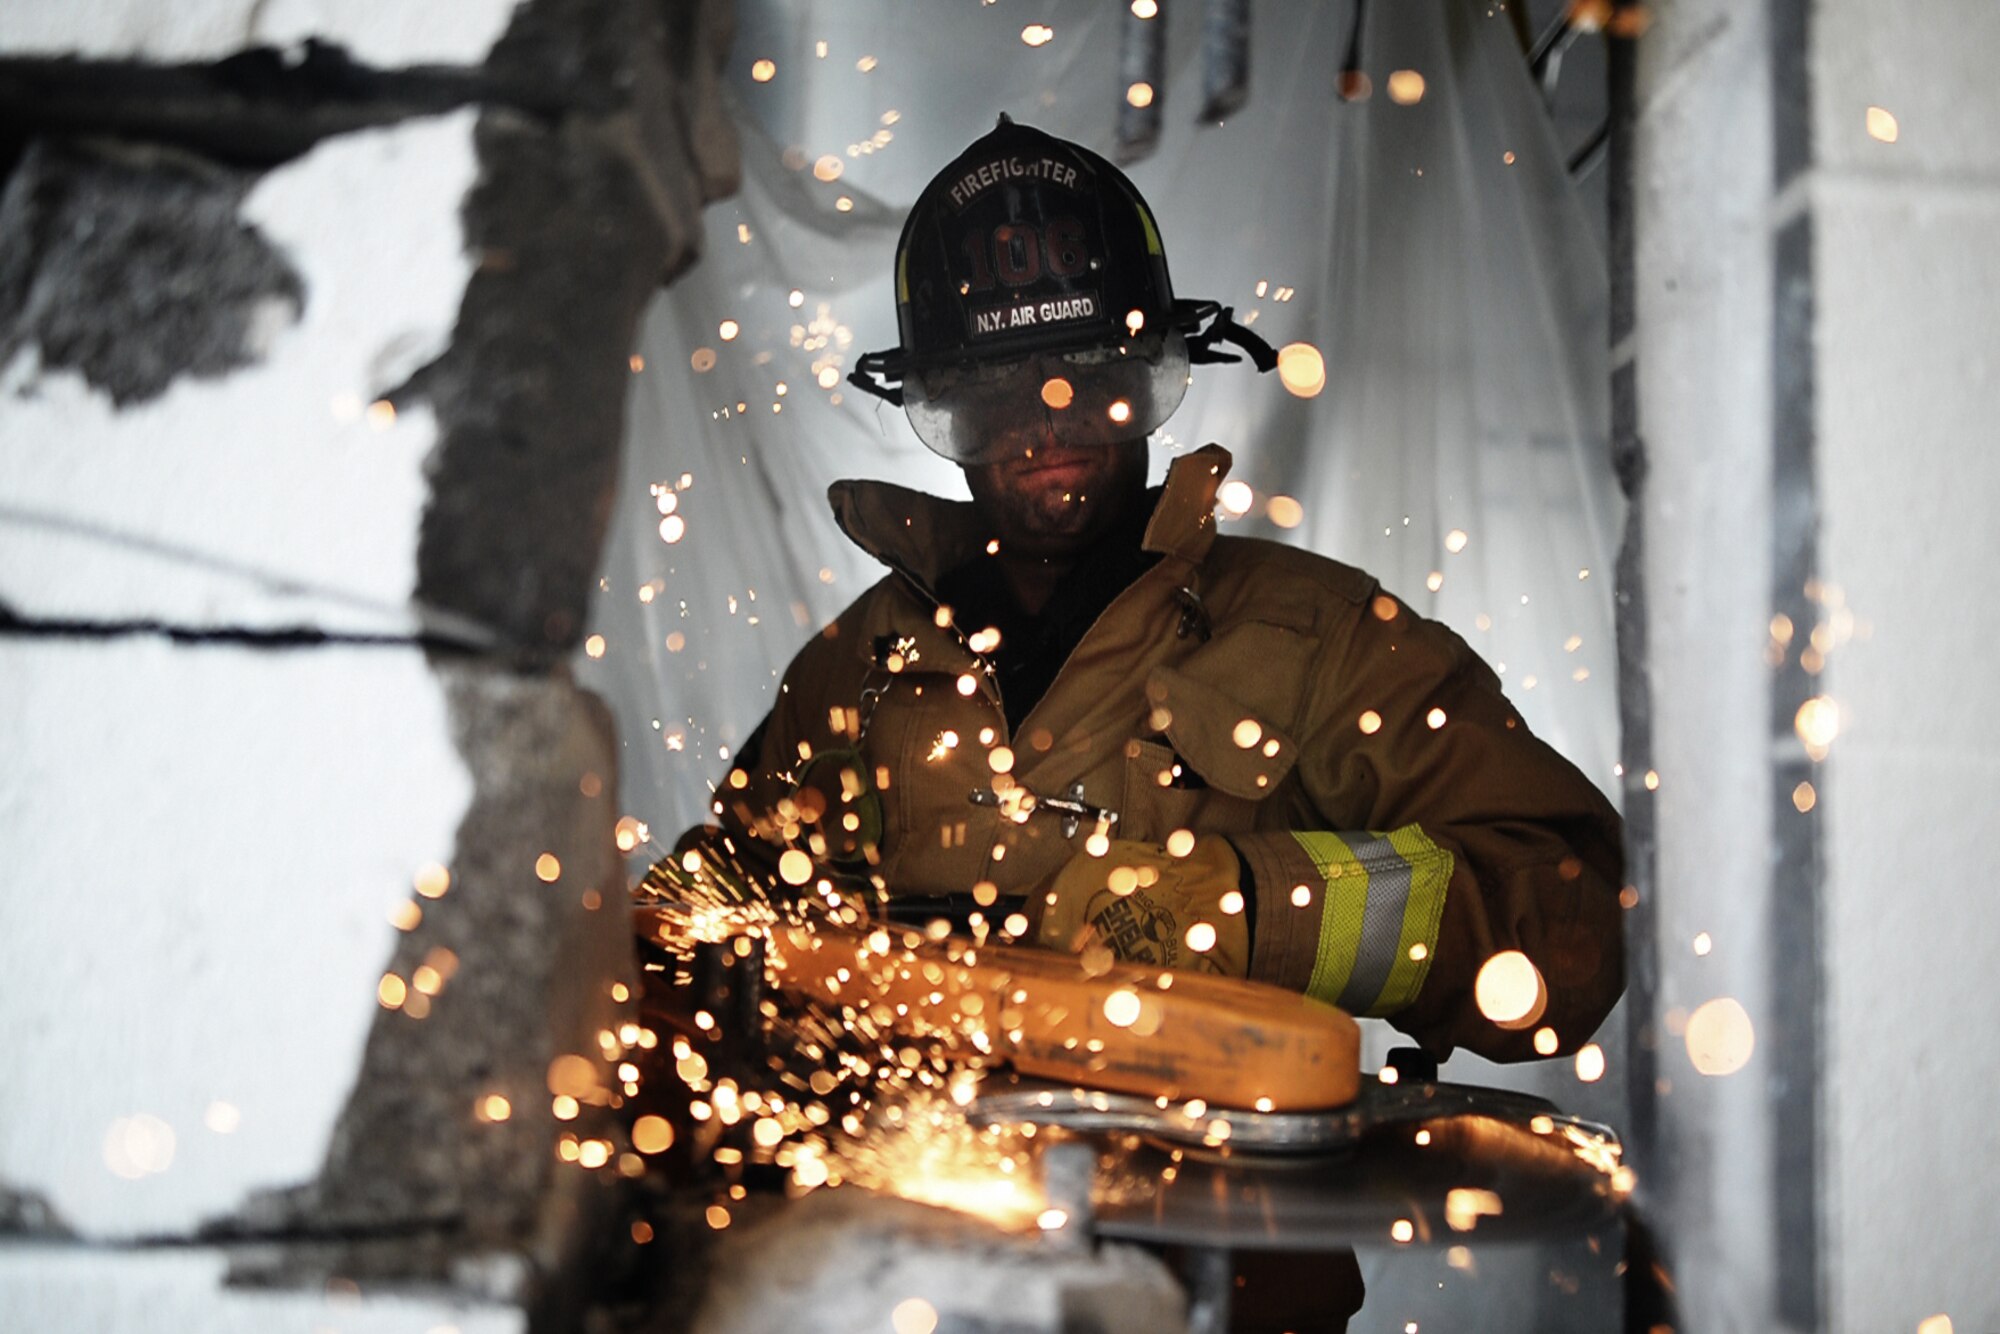 Staff Sgt. Daniel Glenn, a firefighter with the 106th Rescue Wing, operates a powered saw in order to cut through a reinforced cinder block wall at Francis S. Gabreski Air National Guard Base, N.Y., Aug. 25, 2016. (U.S. Air National Guard photo/Staff Sgt. Christopher S. Muncy)